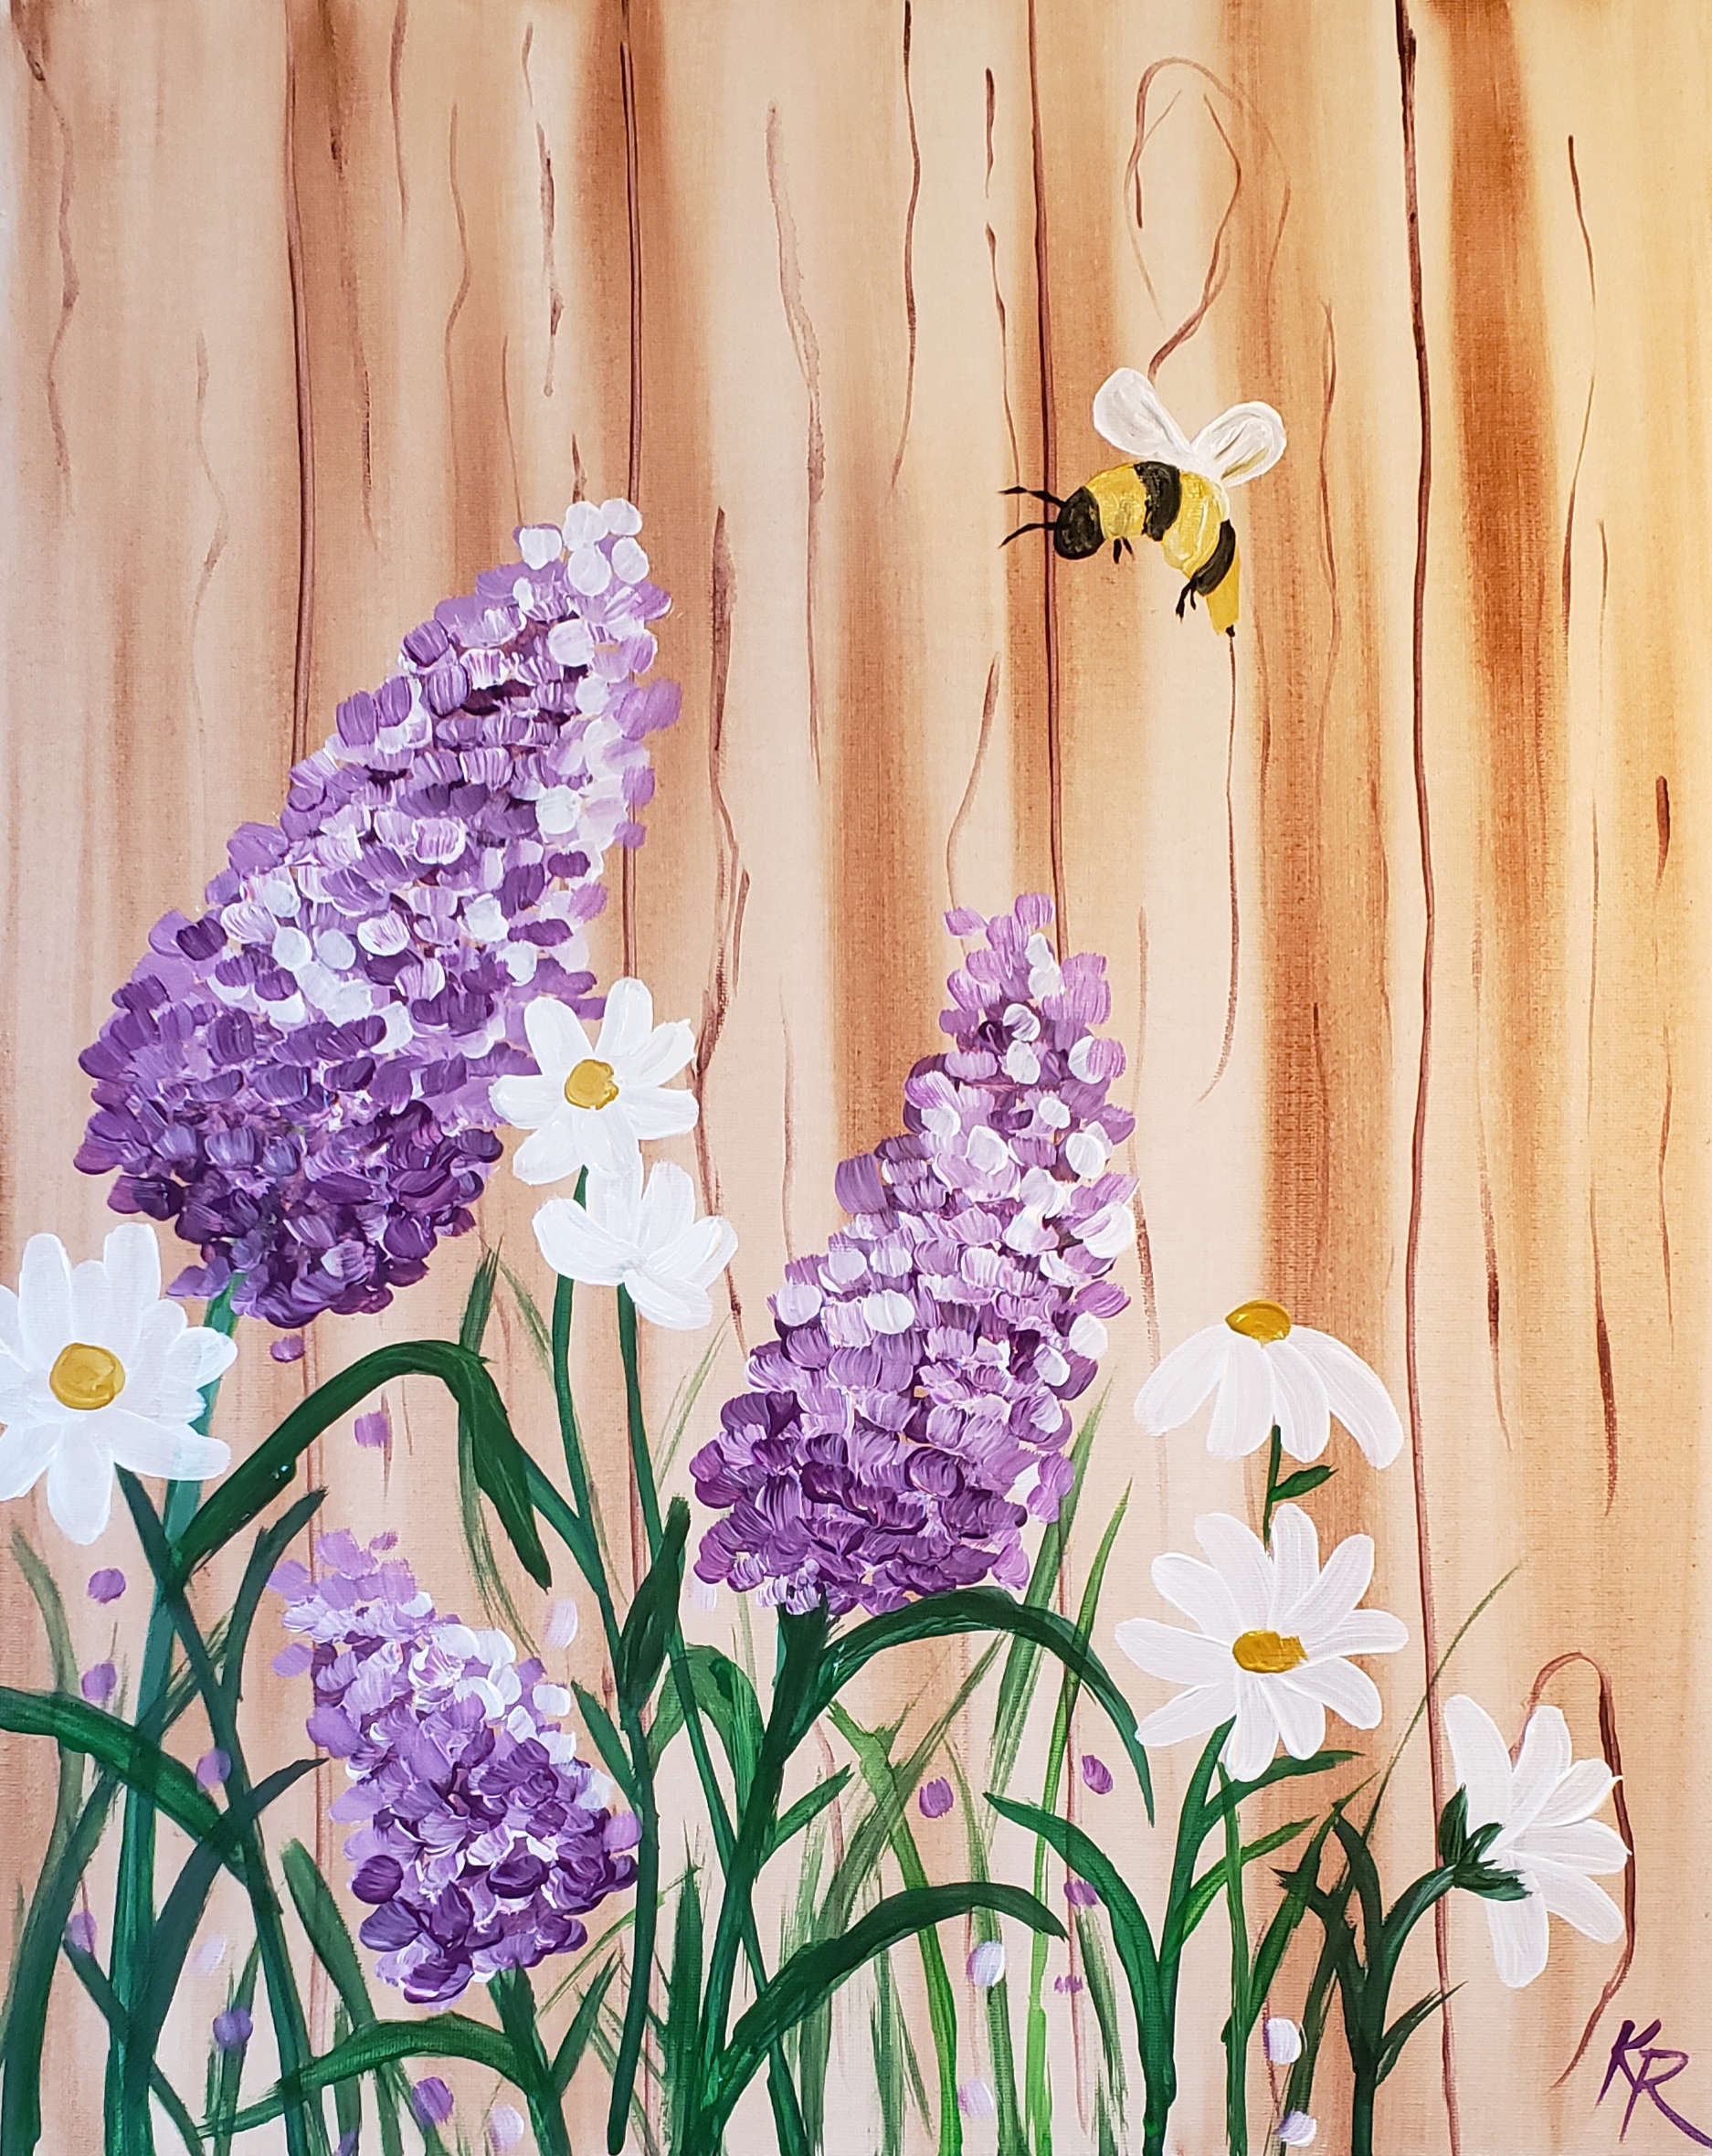 Image of an acrylic painting with lavender and daisy flowers and a flying bee 